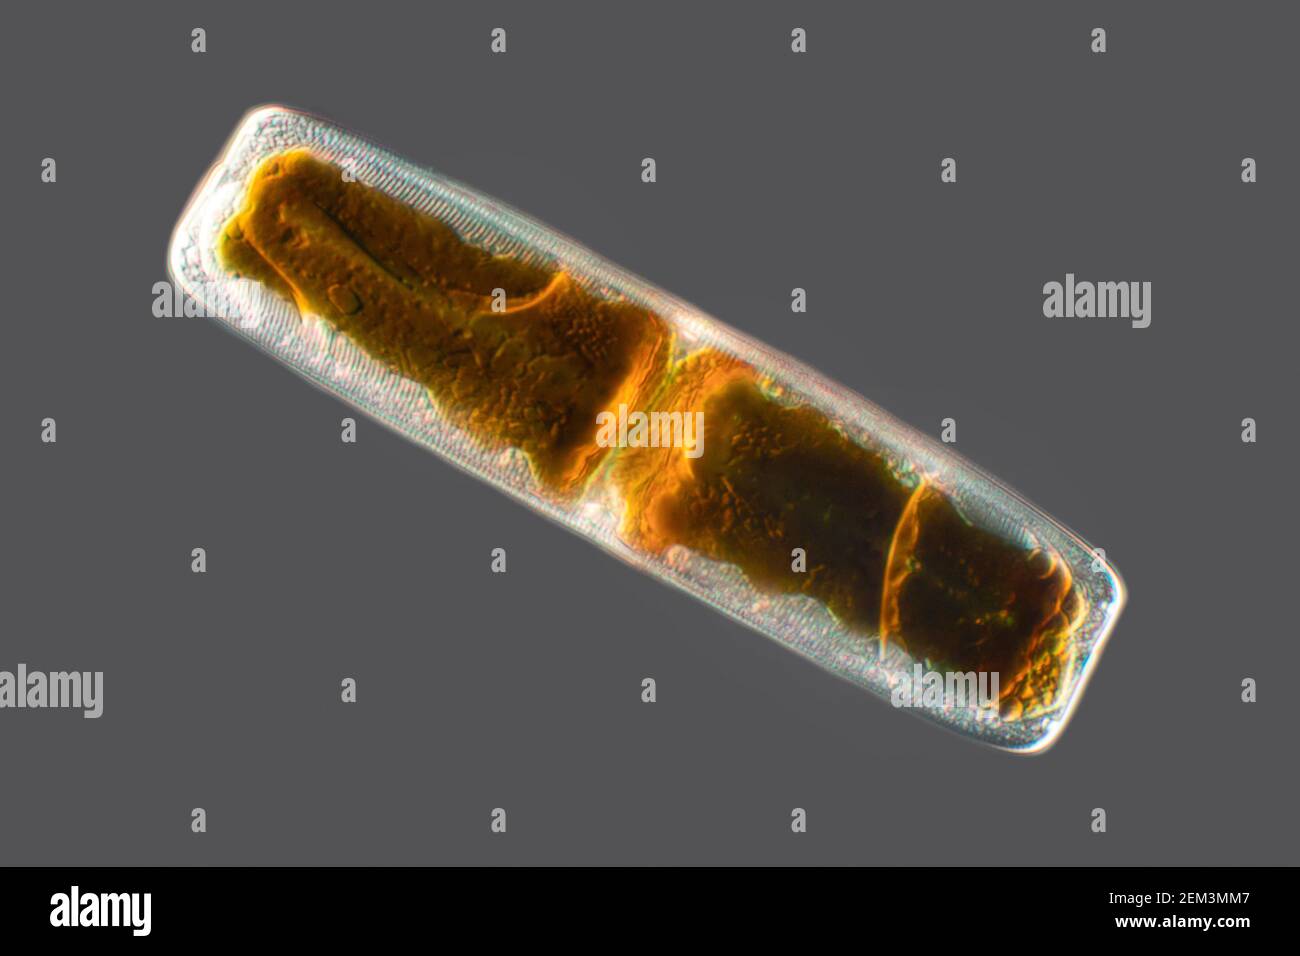 diatom (Diatomeae), diatom from the Mediterranean Sea, differential interference contrast image, magnification x200 related to 35 mm Stock Photo